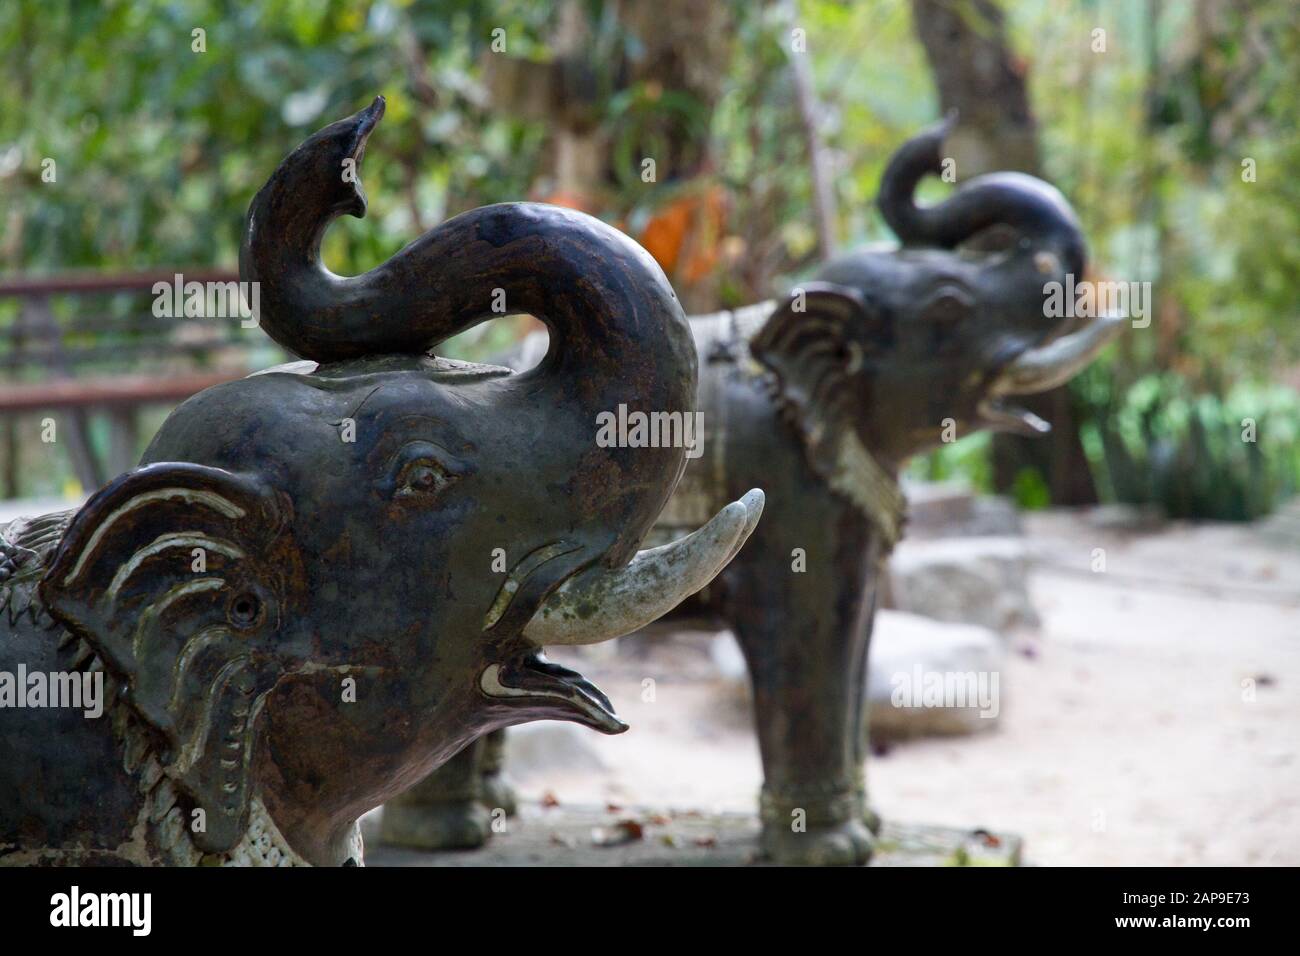 Thailand Elephants statues in Wat Phra Lat temple area  Temple, Stock Photo